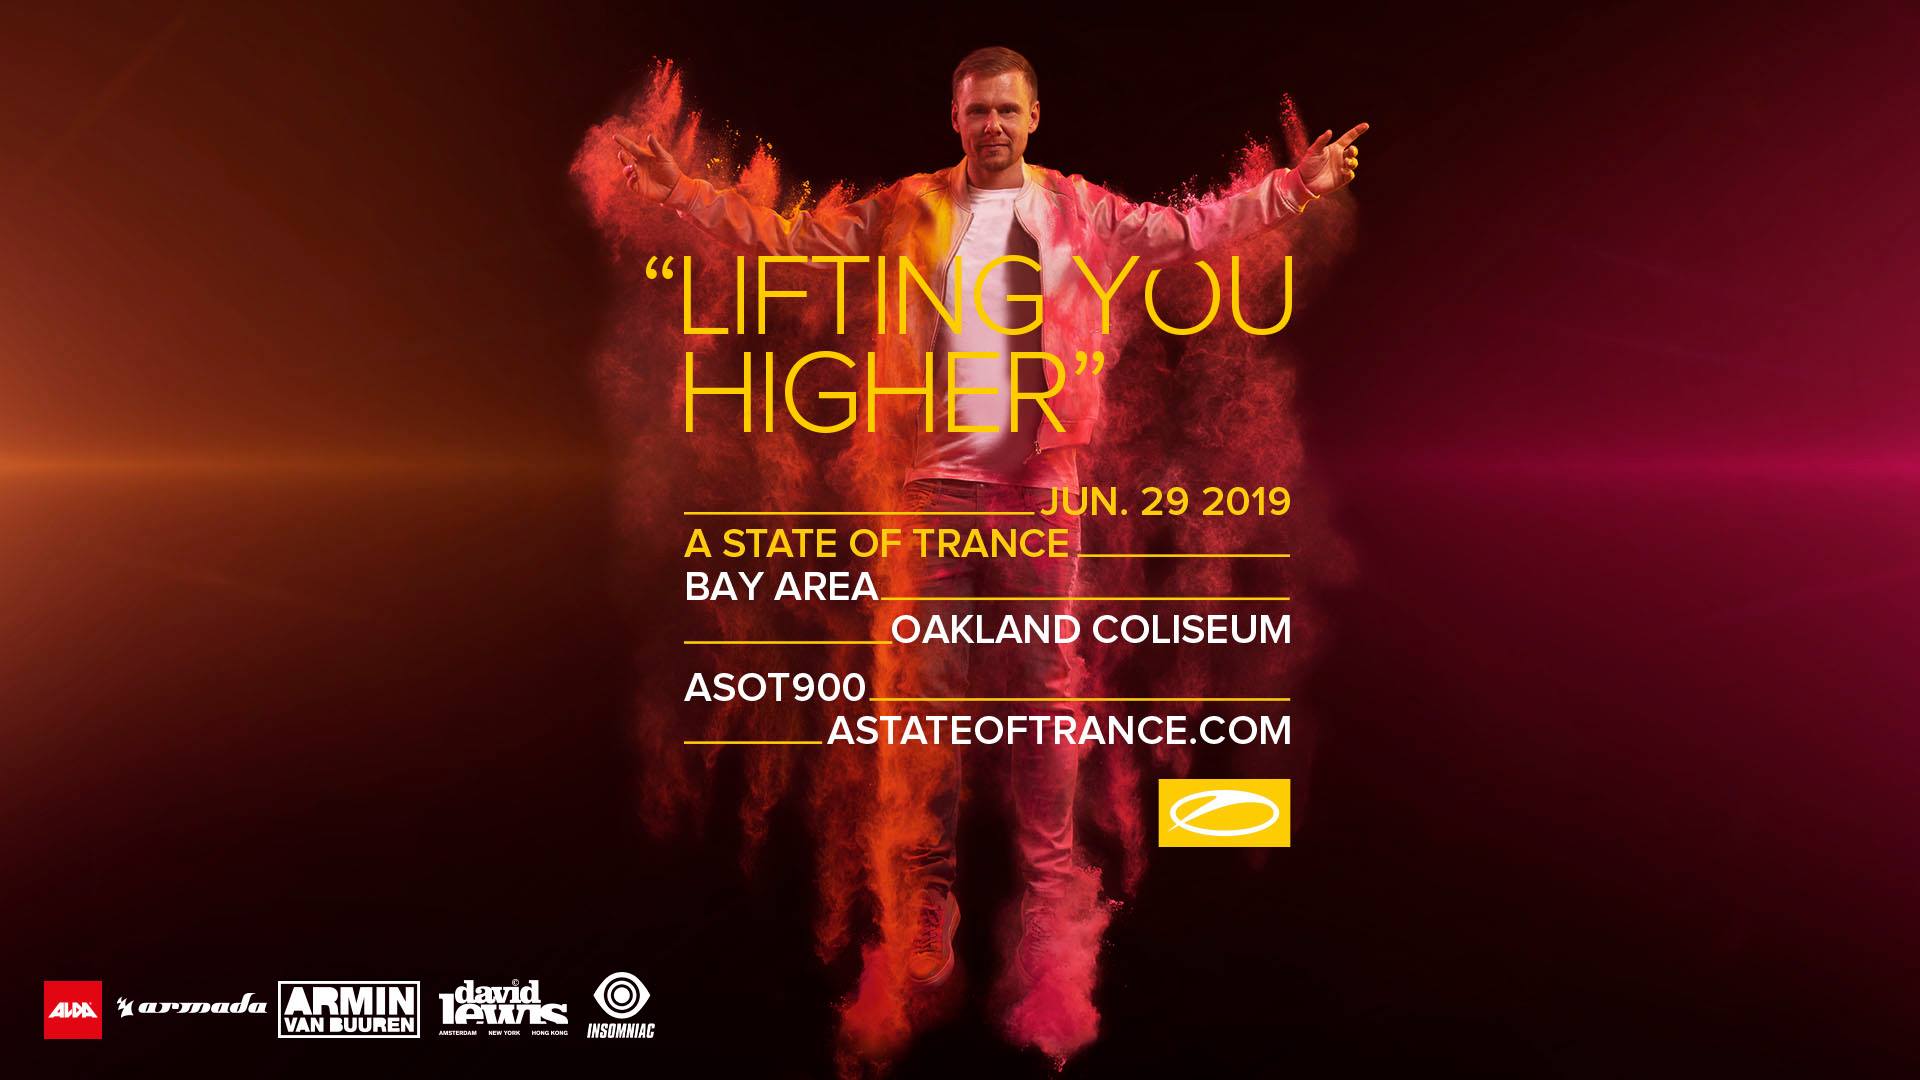 A State of Trance ASOT 900 Bay Area